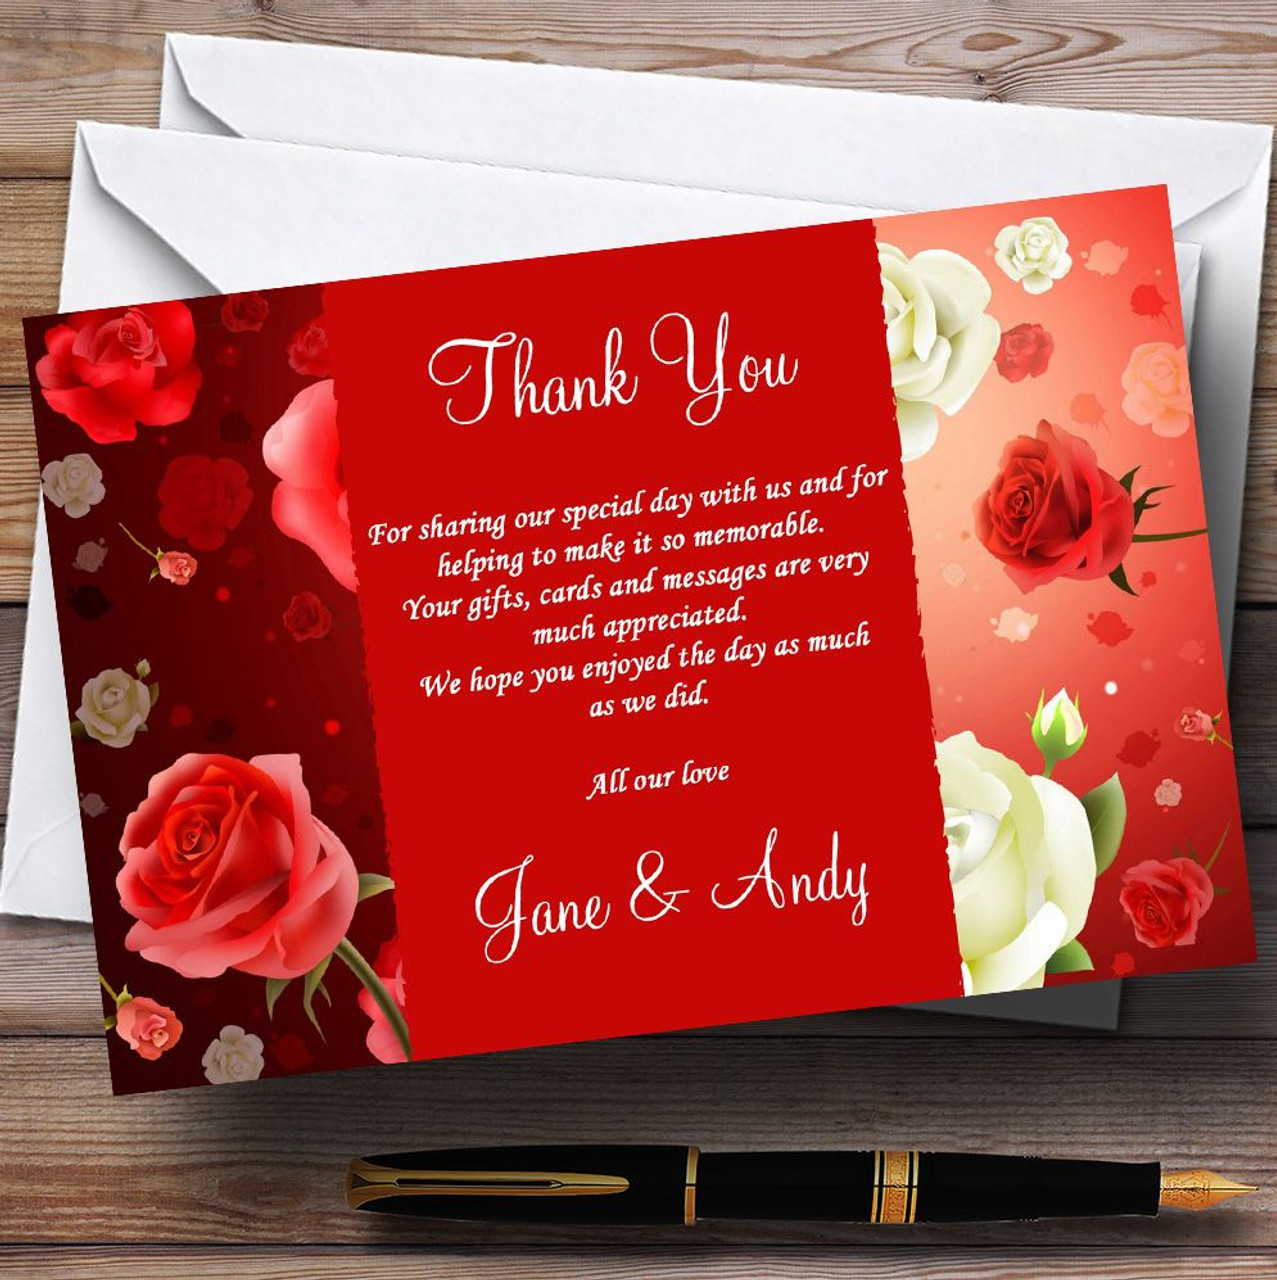 thank you images with red roses